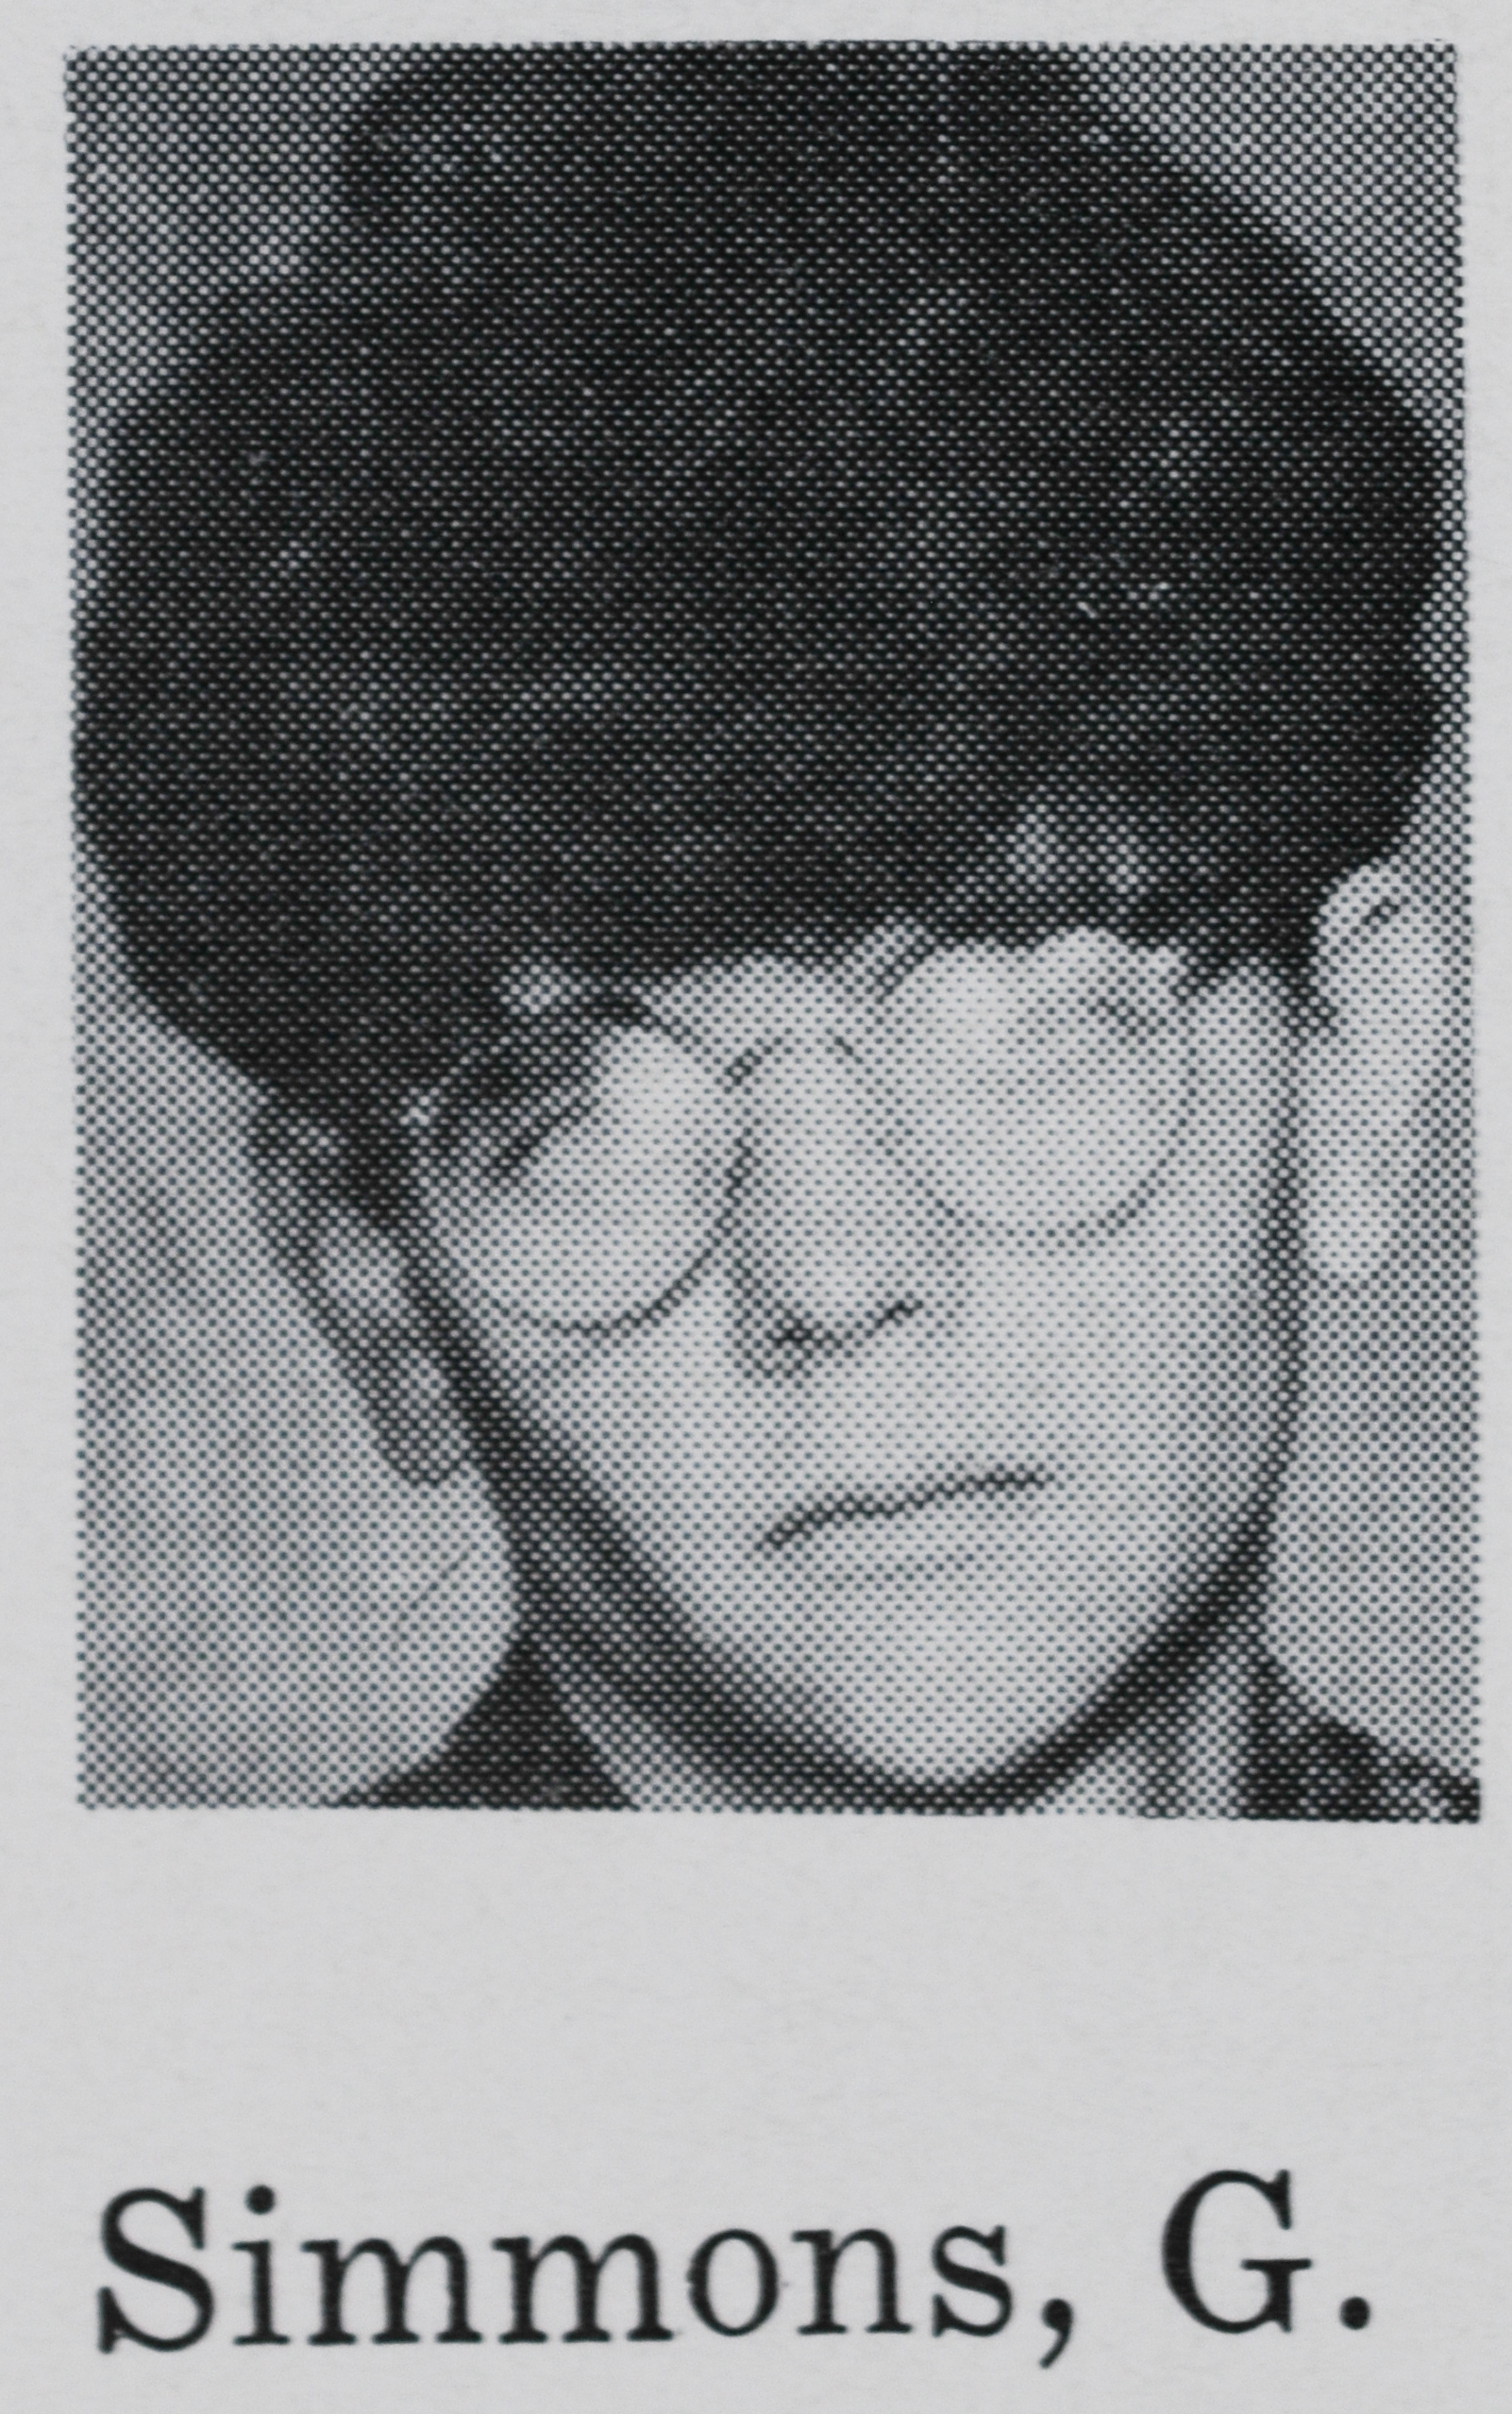 Greg Simmons (from 1967 yearbook)